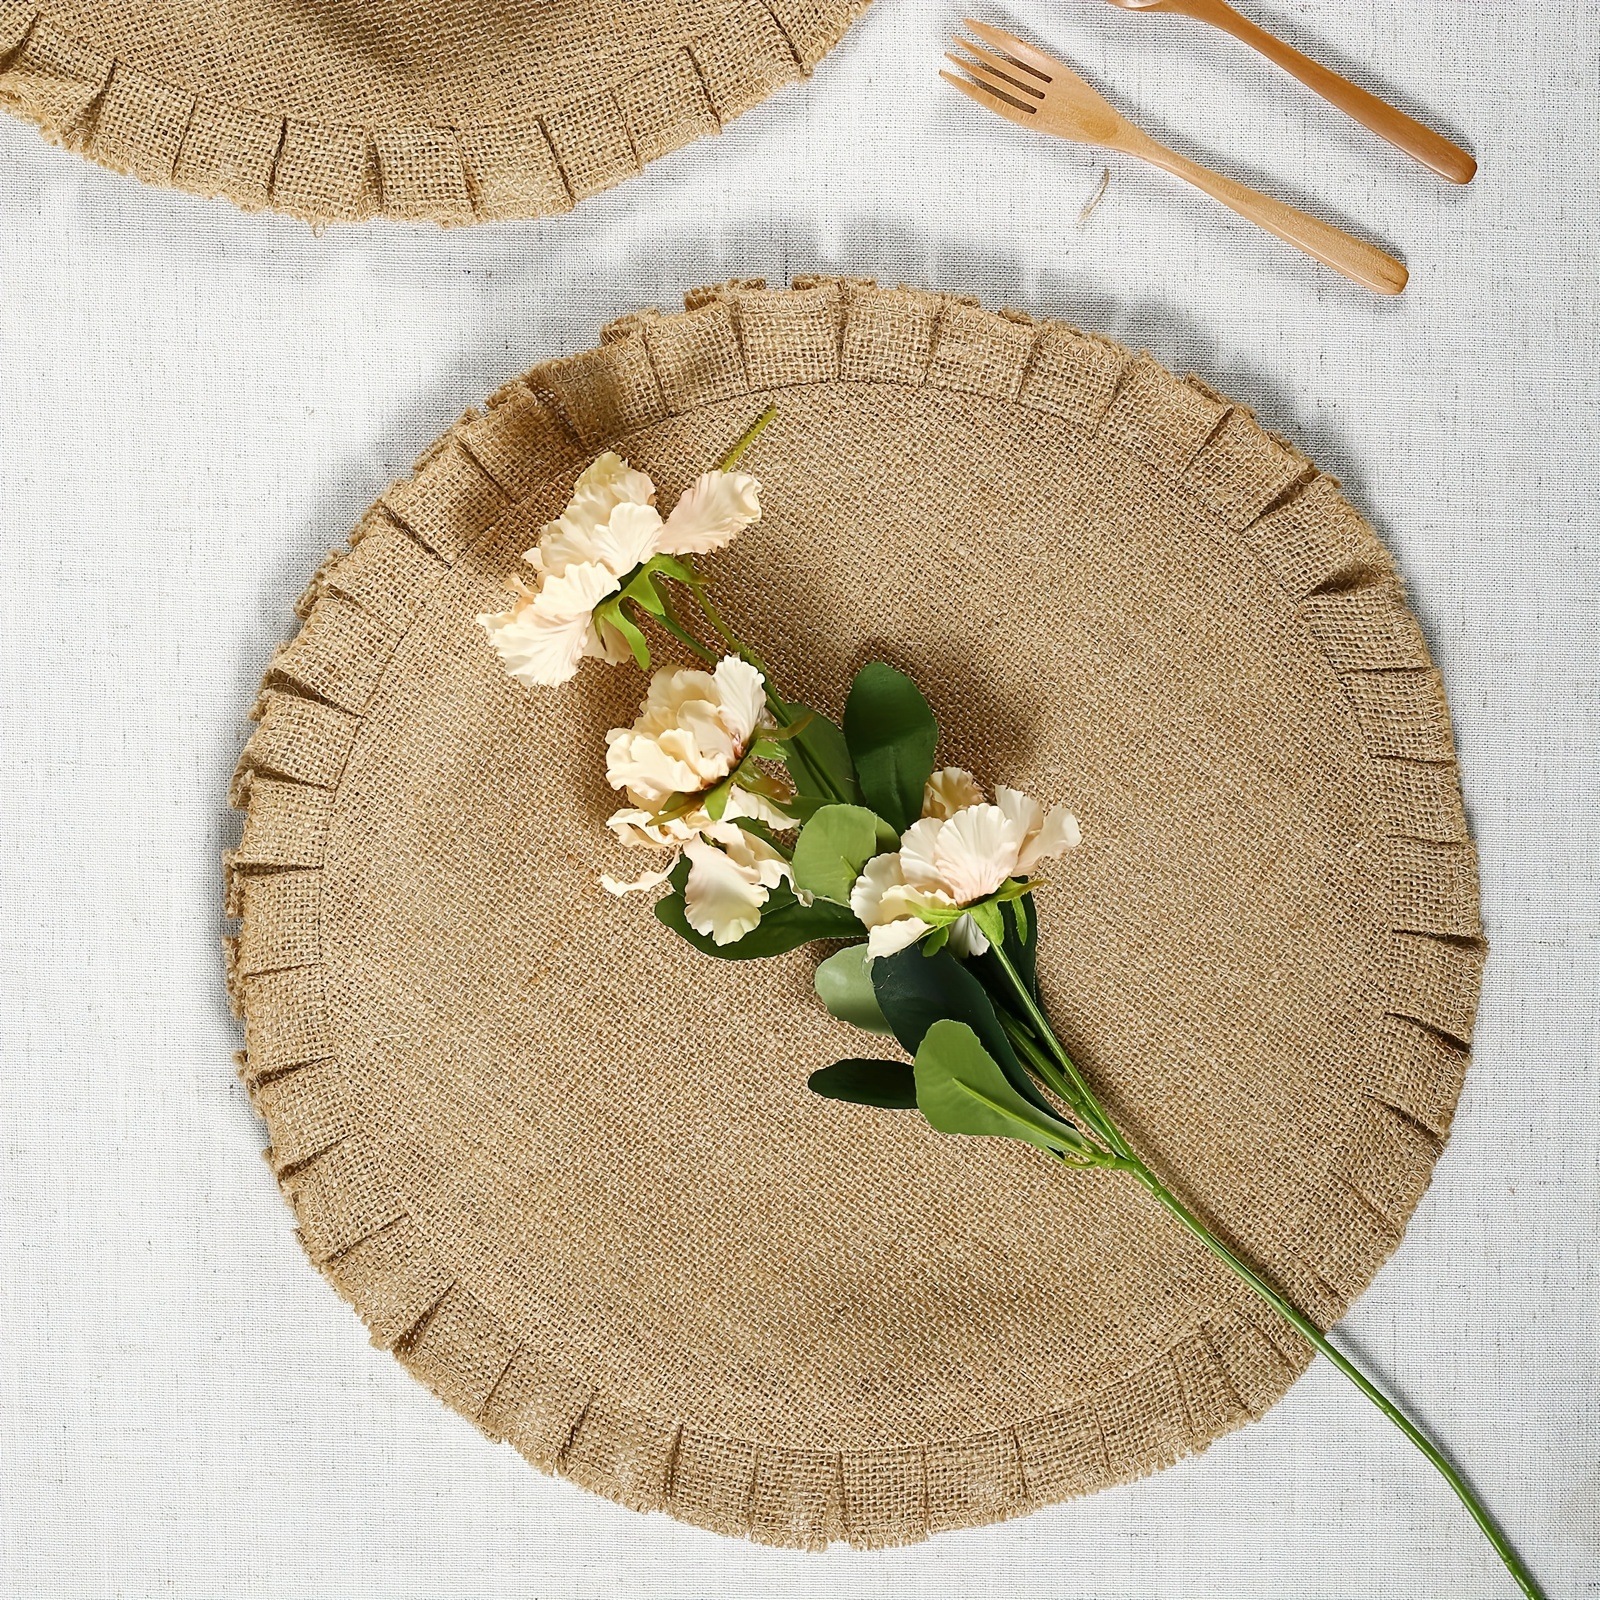 1/2/4/6pcs, Wheat Straw Placemats - Handmade Woven Wood for Outdoor Dining  - Non-Slip Jute Place Mats for Home Decor